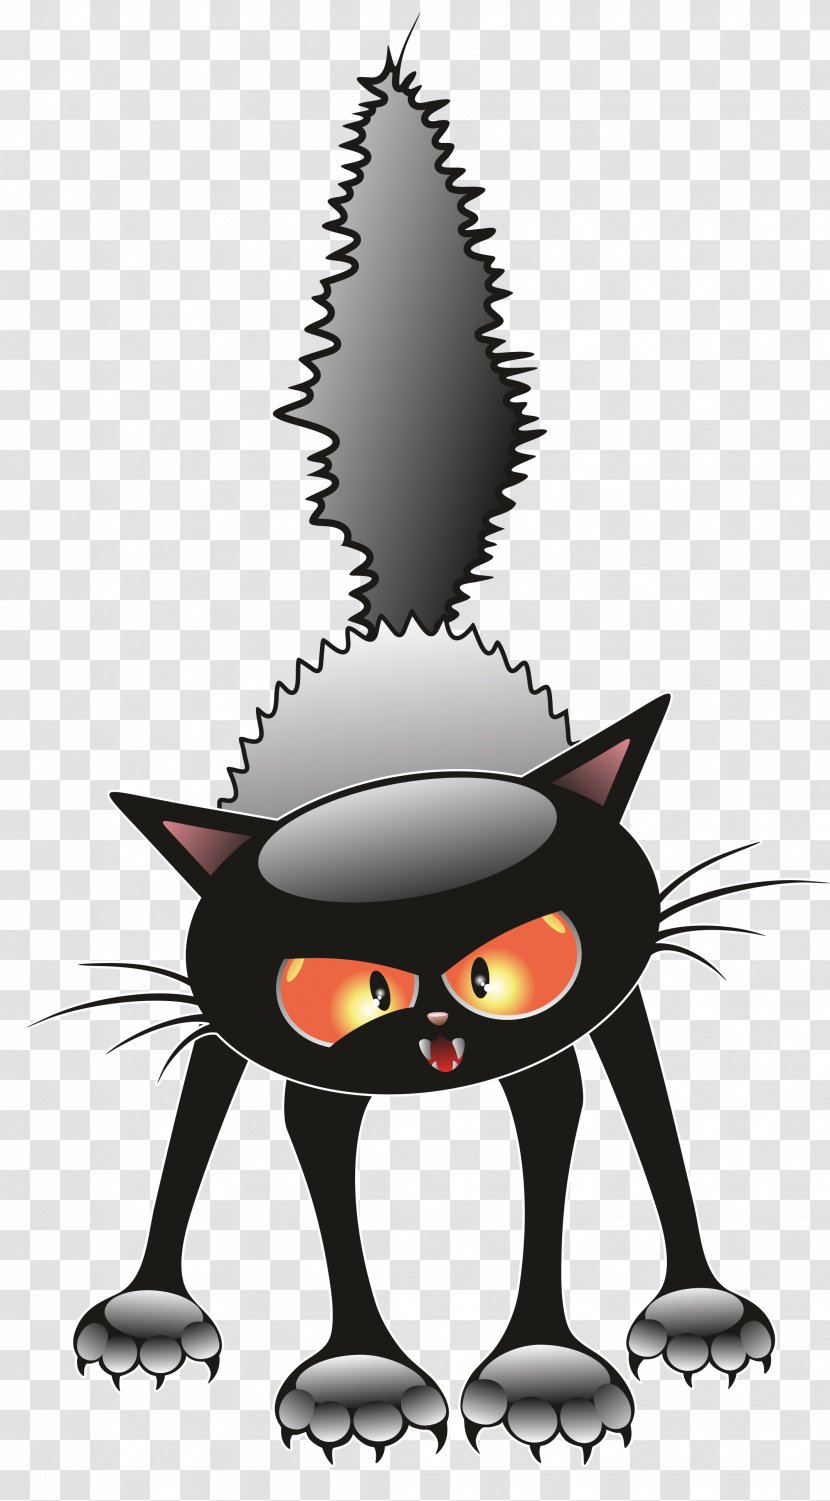 Black Cat Cartoon Gobbolino, The Witchs - Witch Transparent PNG